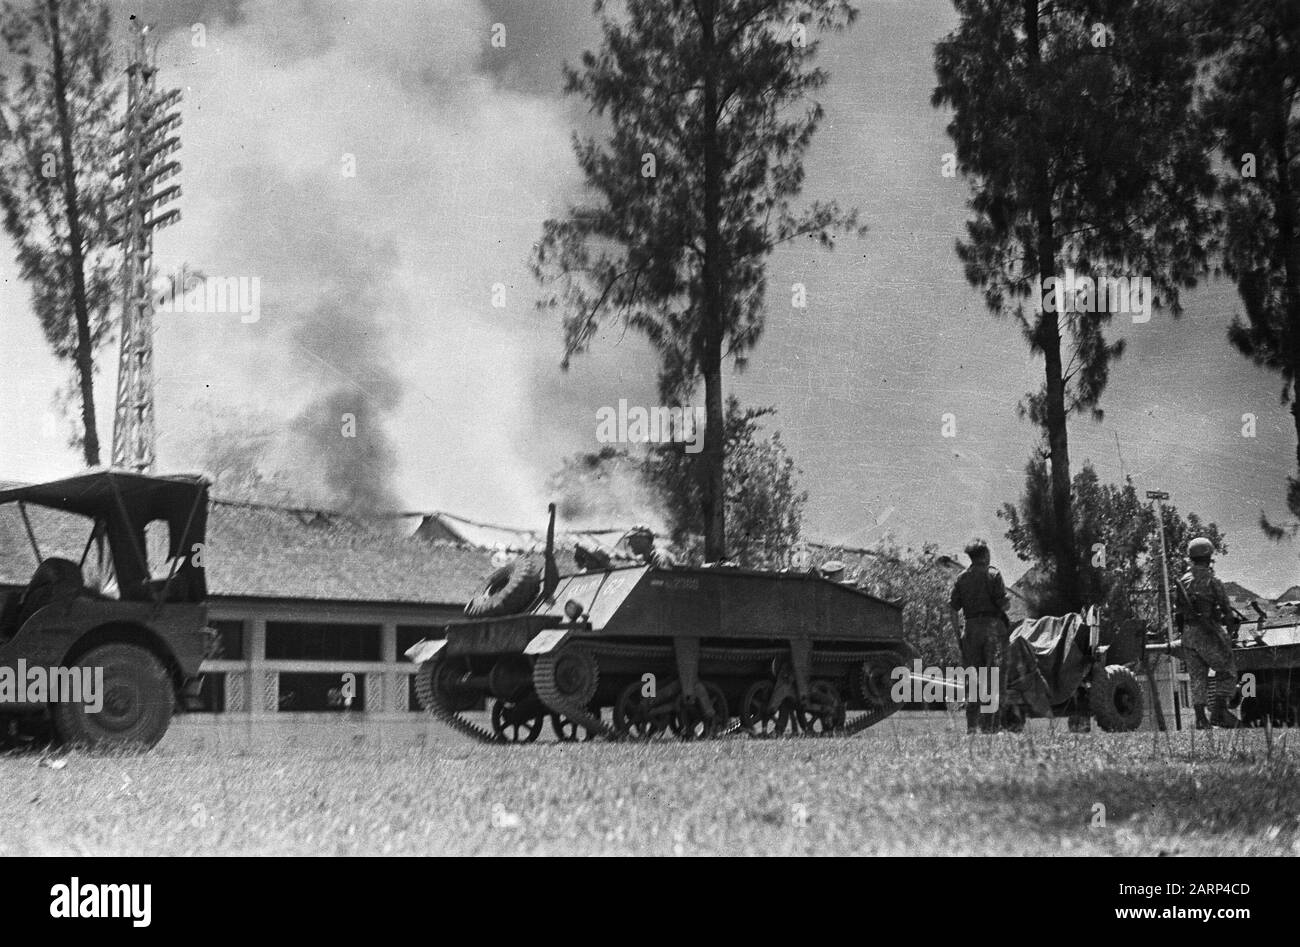 The advance of the V-Brigade  Jeep and artillery pullers stand still. Behind it a burning building Date: 20 December 1948 Location: Indonesia, Dutch East Indies Stock Photo